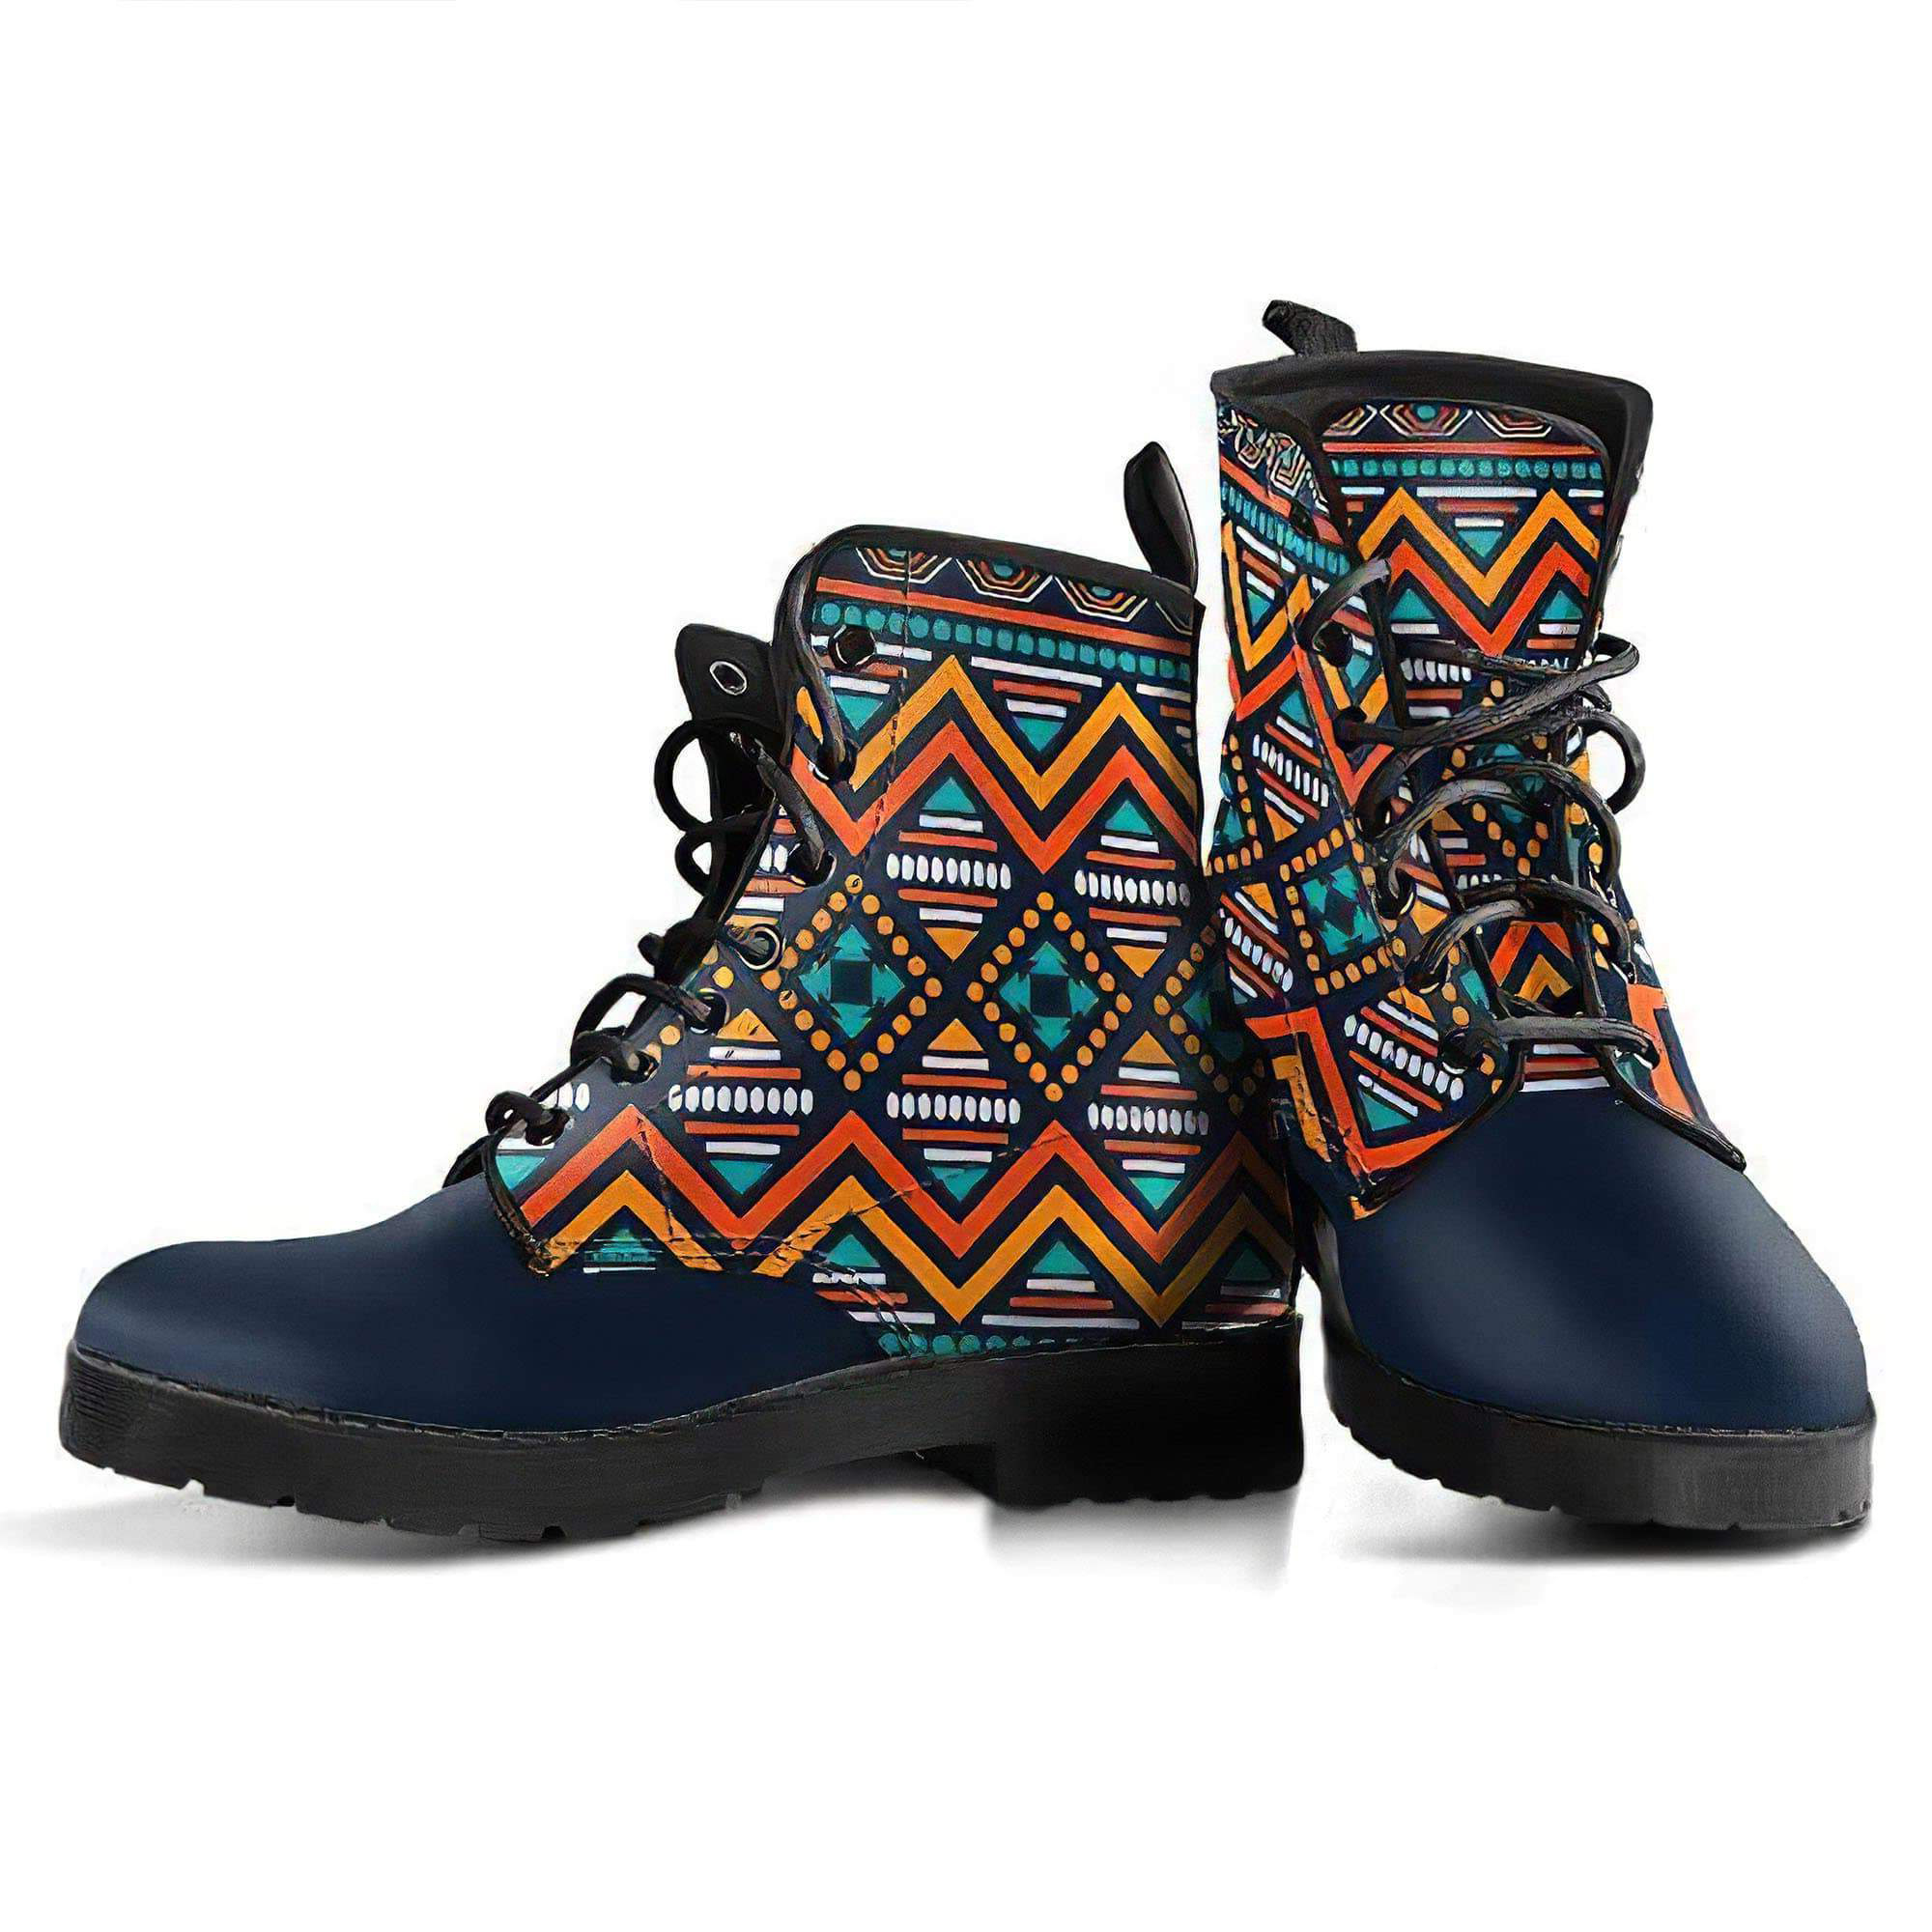 tribal-ethnic-pattern-handcrafted-boots-women-s-leather-boots-12051969212477.jpg